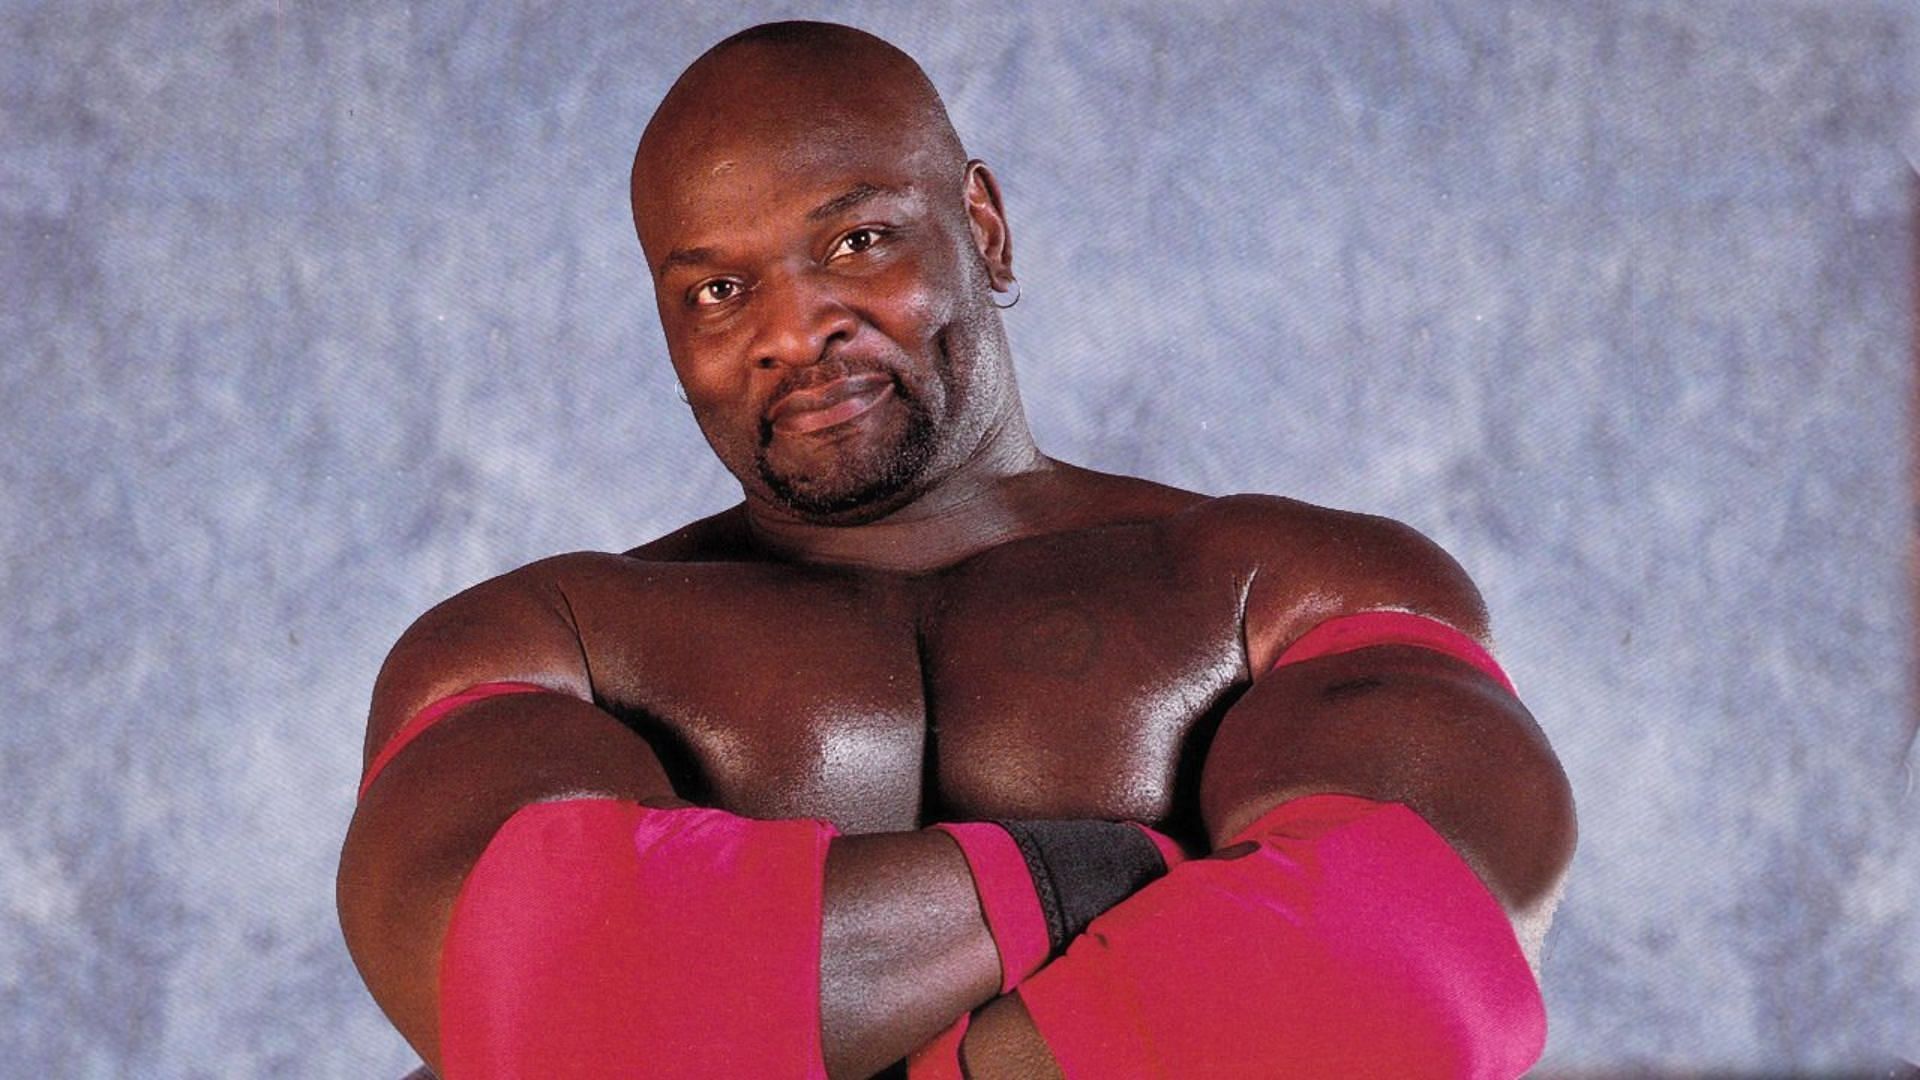 Ahmed Johnson was a big star in the 1990s